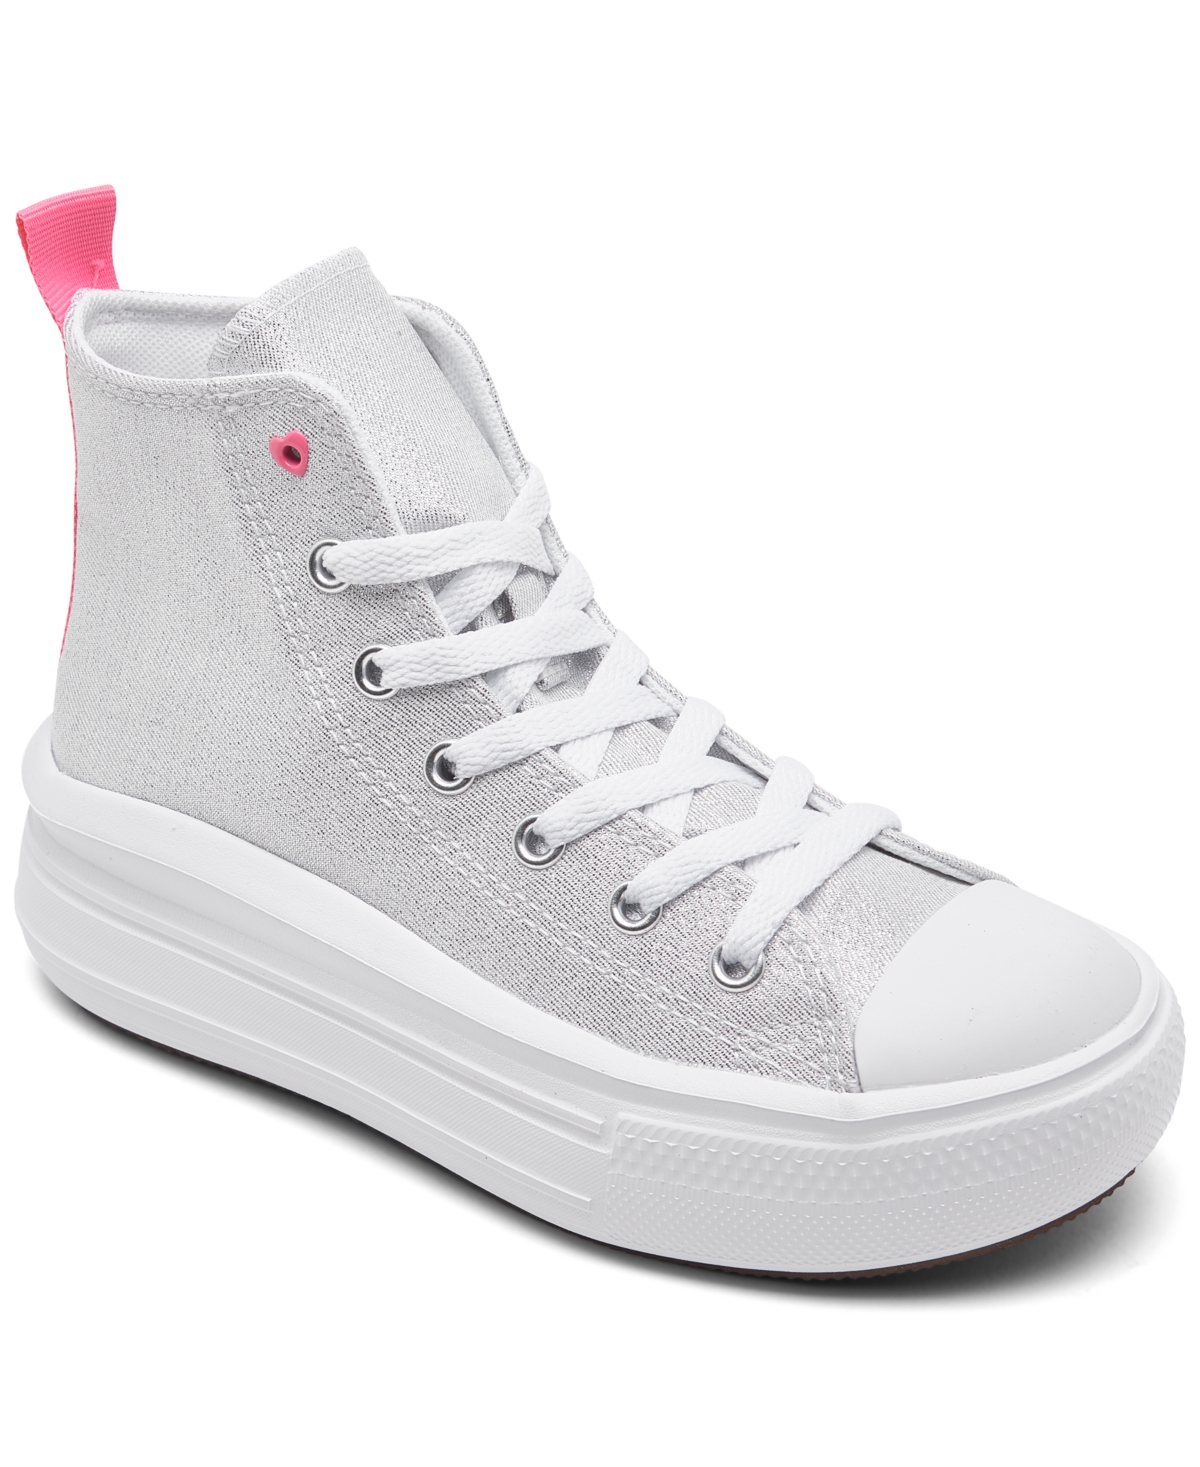 Converse Kids' Little Girls Chuck Taylor All Star Move Sparkle Platform High Top Casual Sneakers From Finish Line In White,oops Pink